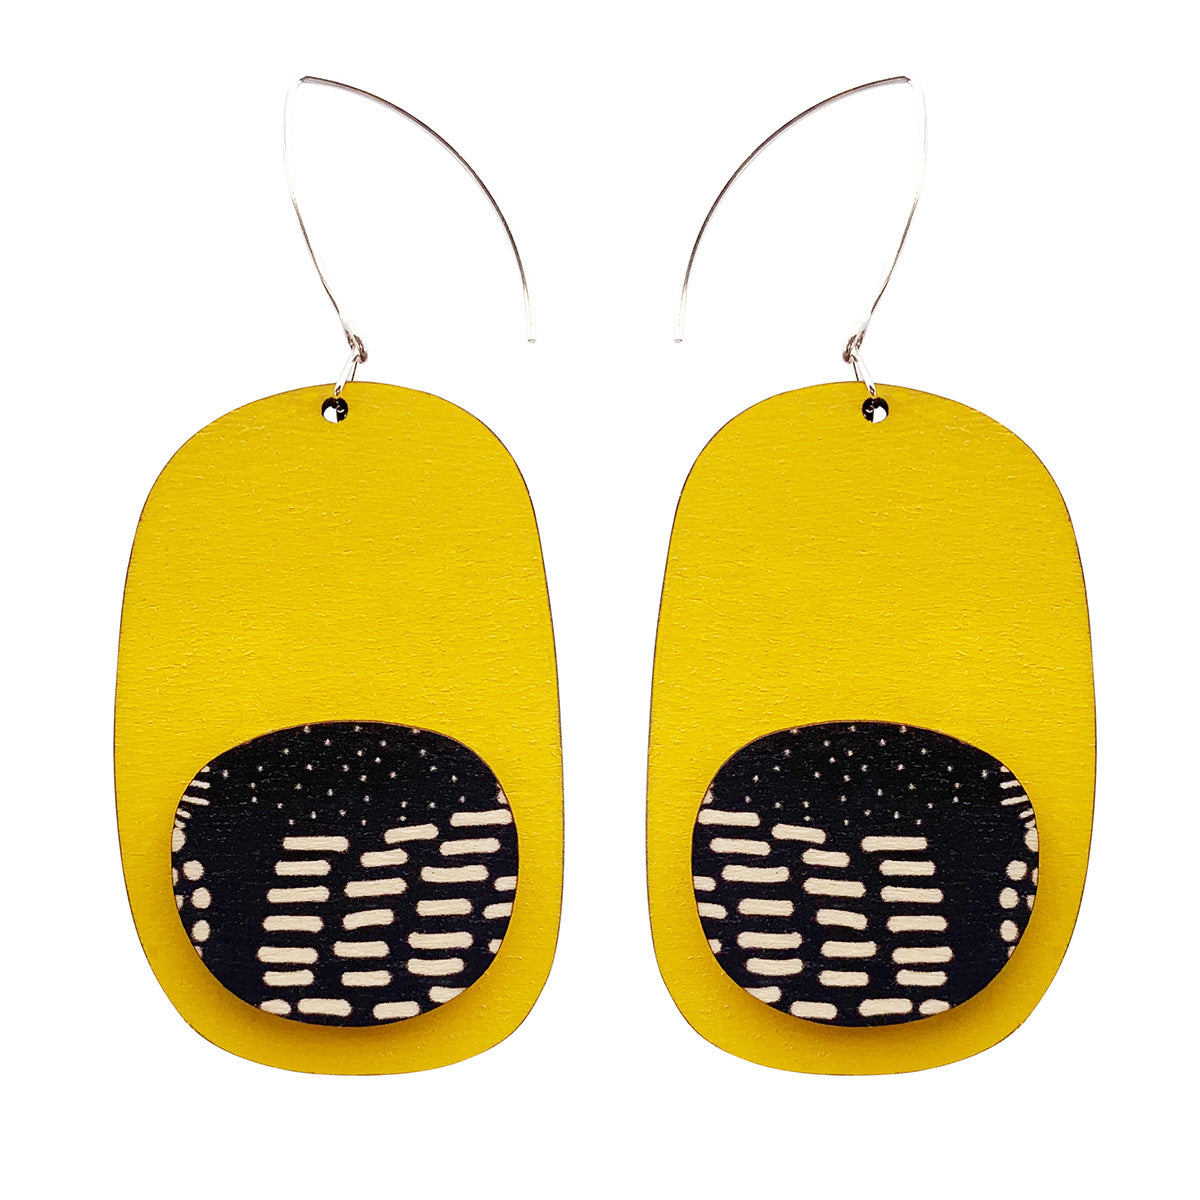 Drop double layer earrings in yellow and Night Garden pattern